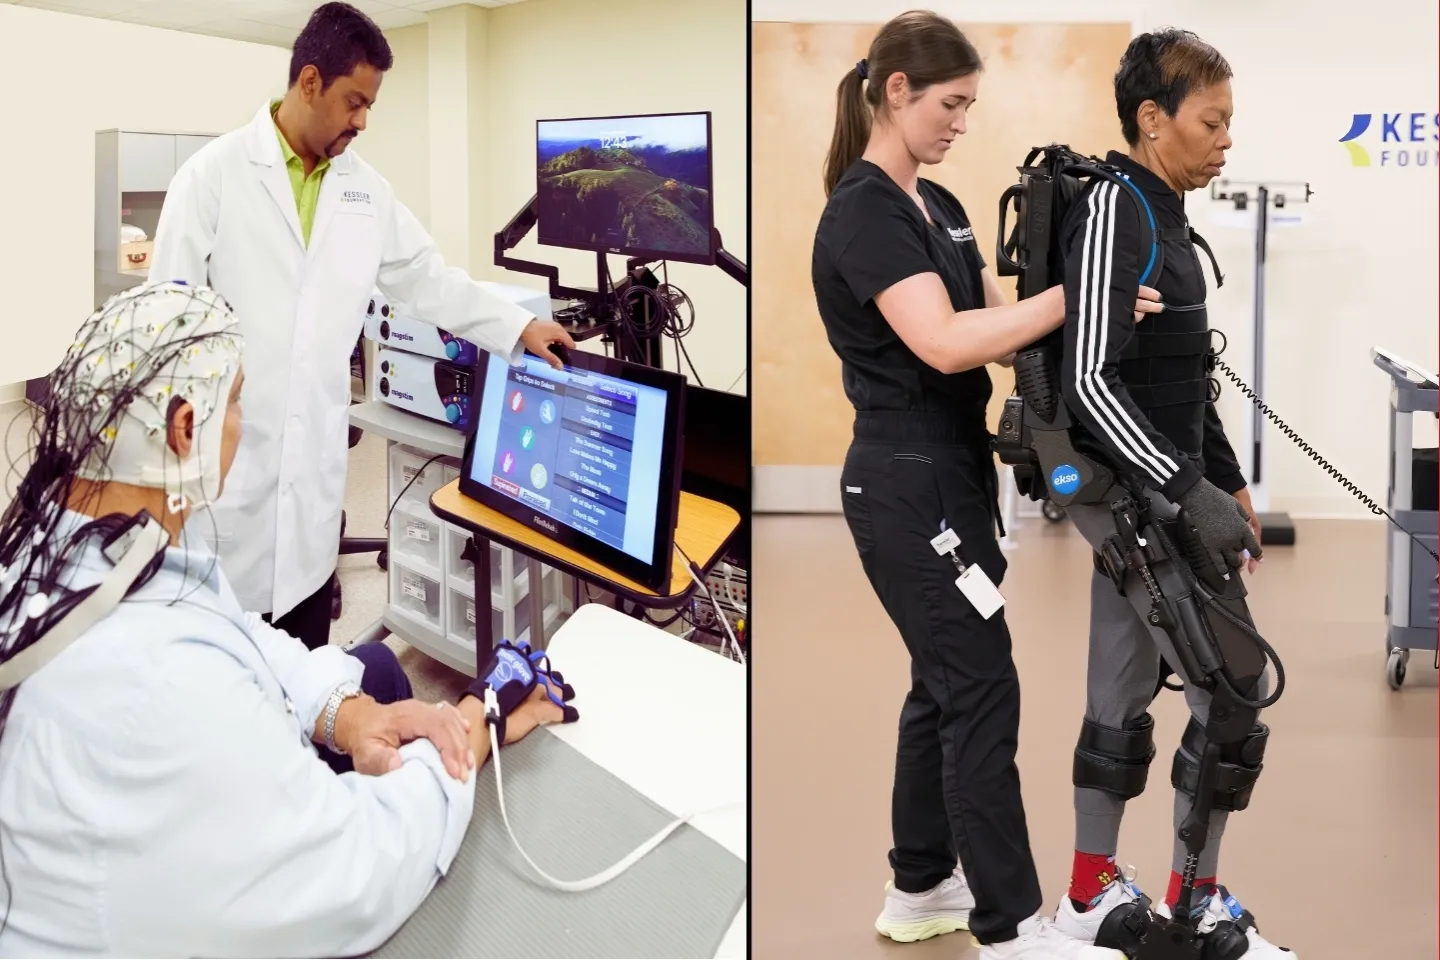 Two images side by side. Left image shows a male research scientist in a white lab coat and a male participant wearing an EEG cap. Right image shows a female physical therapist assisting a female participant in an exoskeleton.